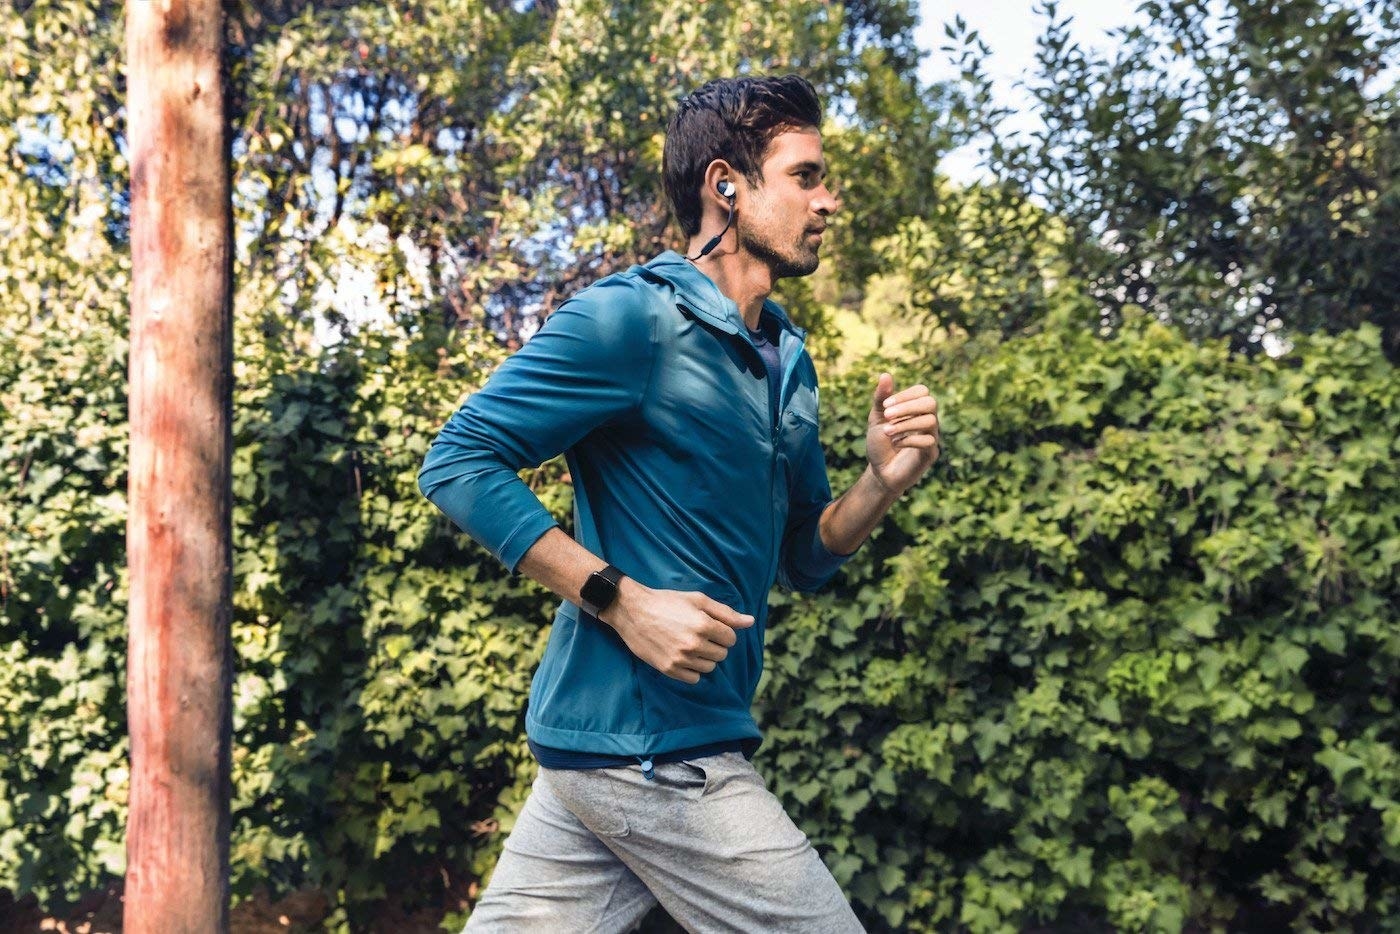 A person jogging while wearing the Fitbit Versa watch on their wrist